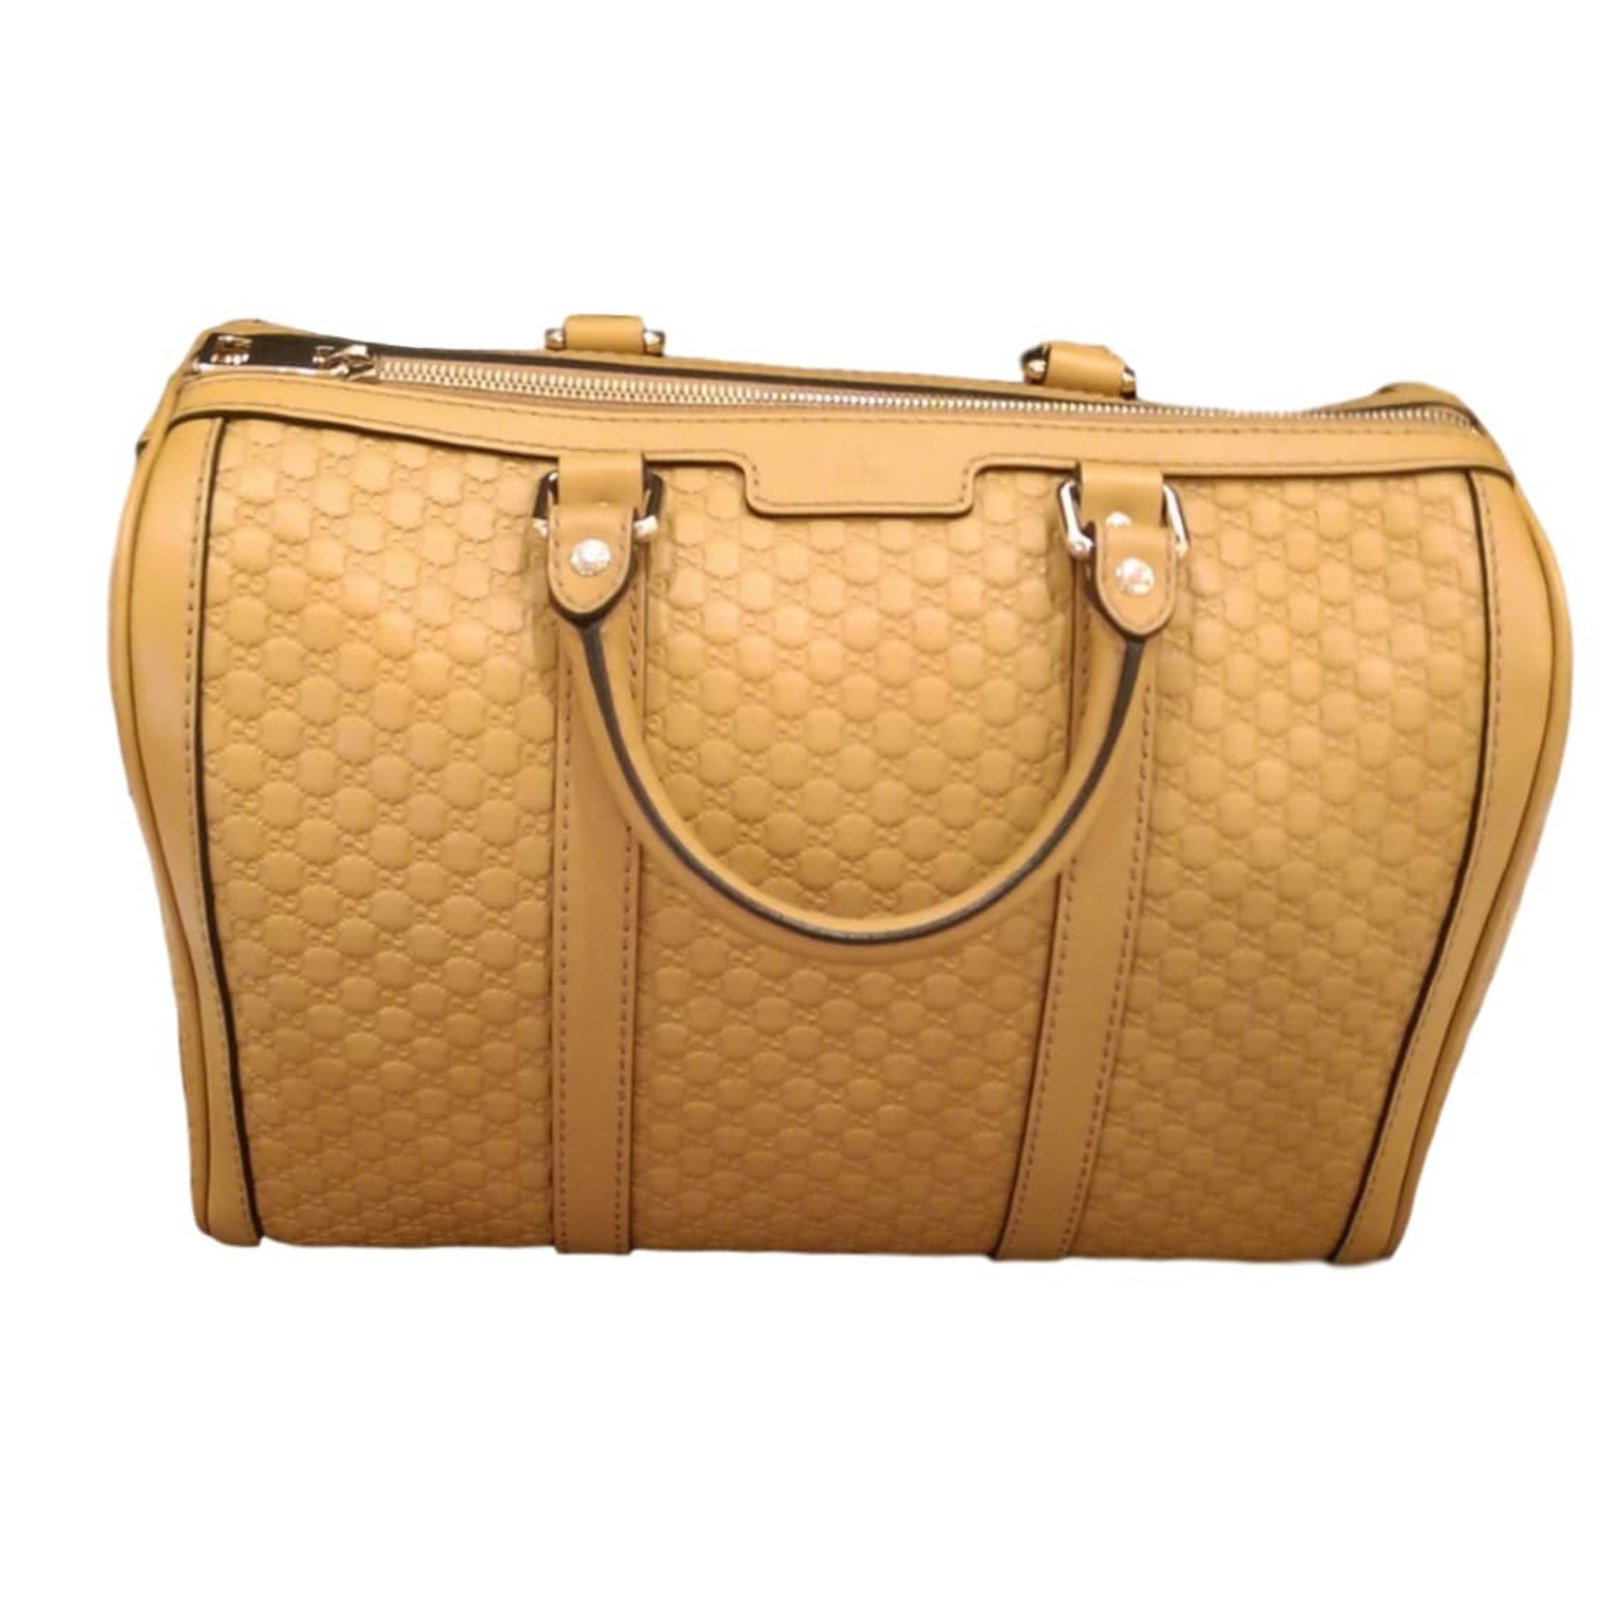 Gucci Boston Leather Bags & Handbags for Women for sale